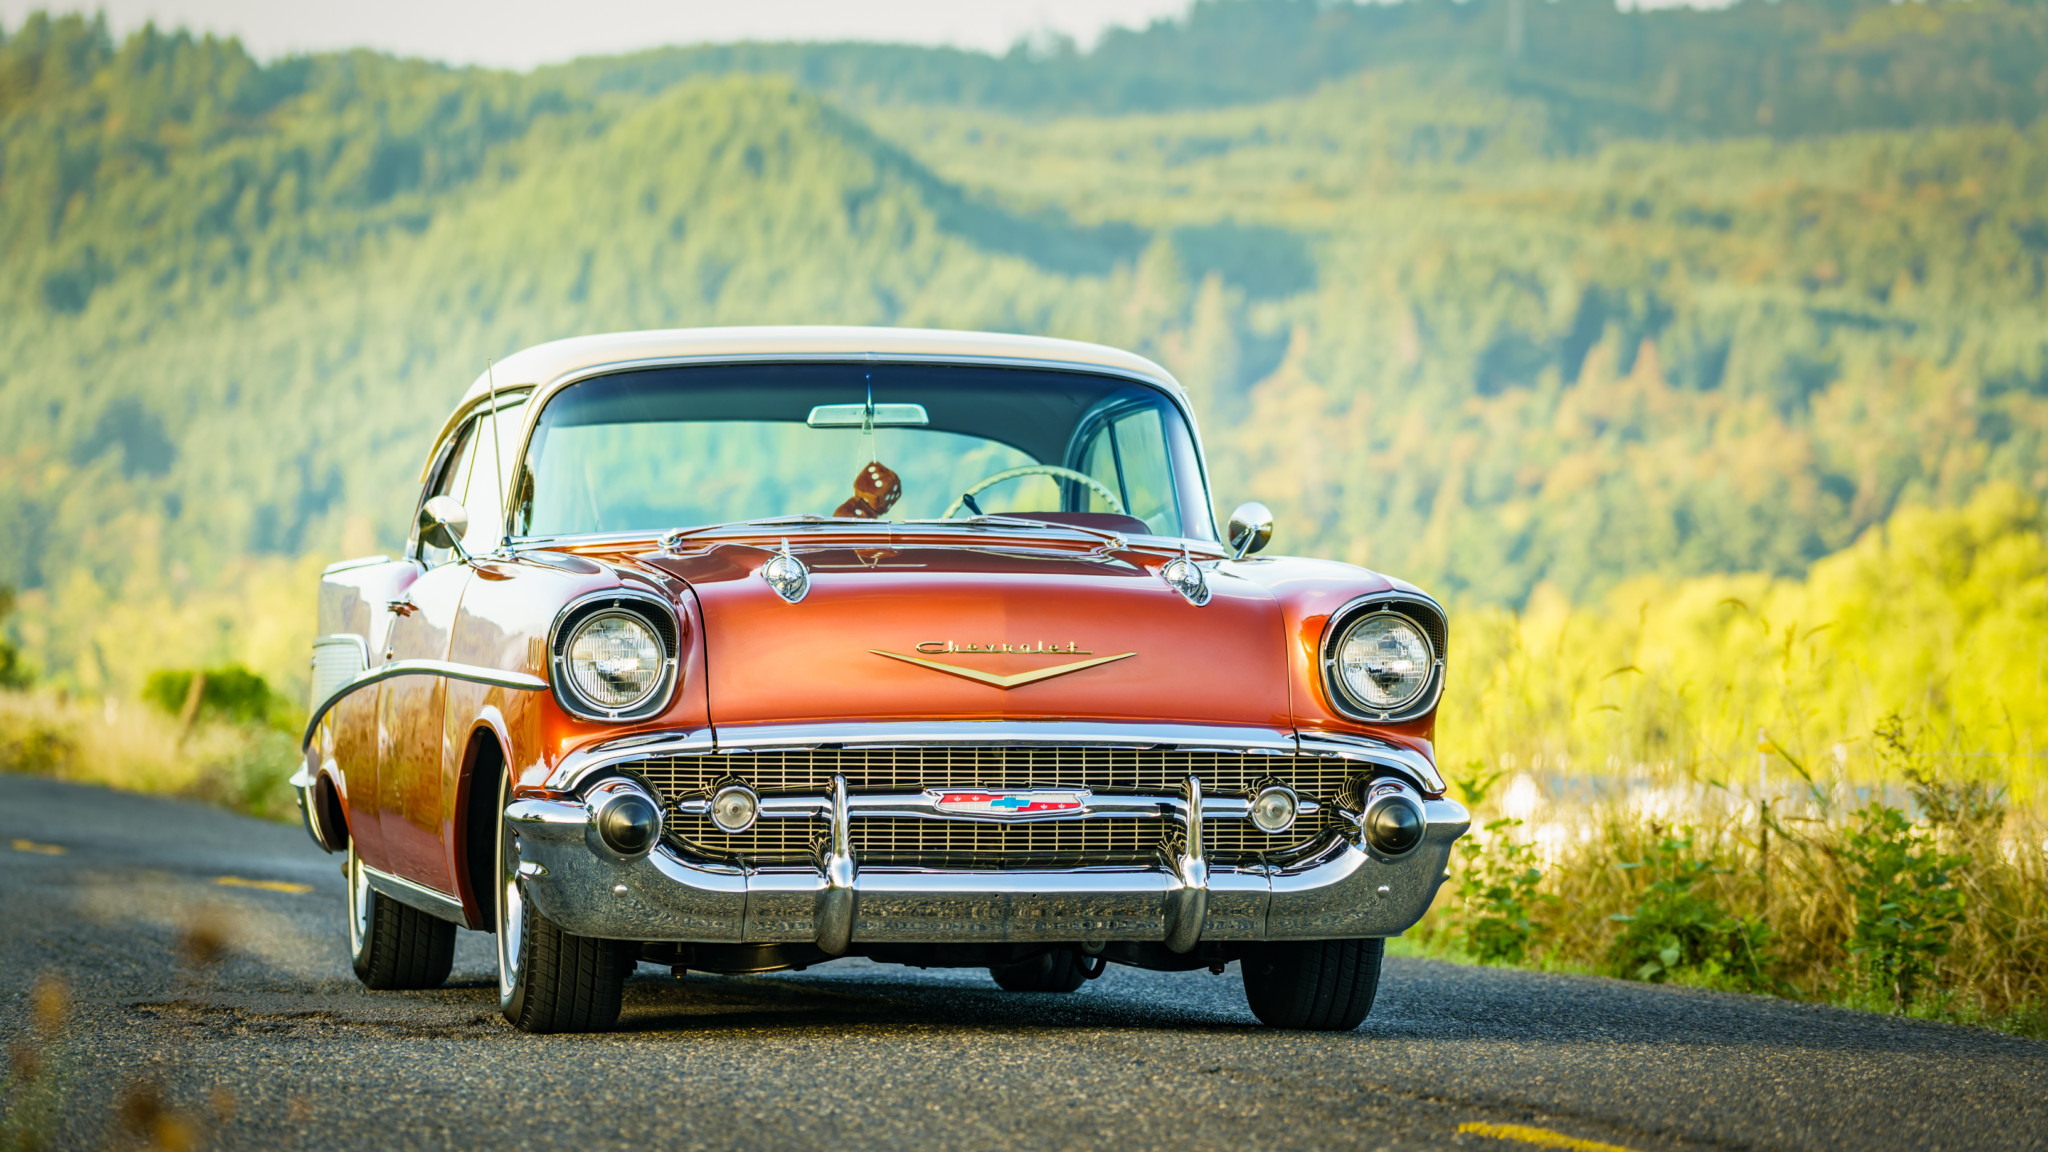  Chevrolet Bel Air HD Android Wallpapers